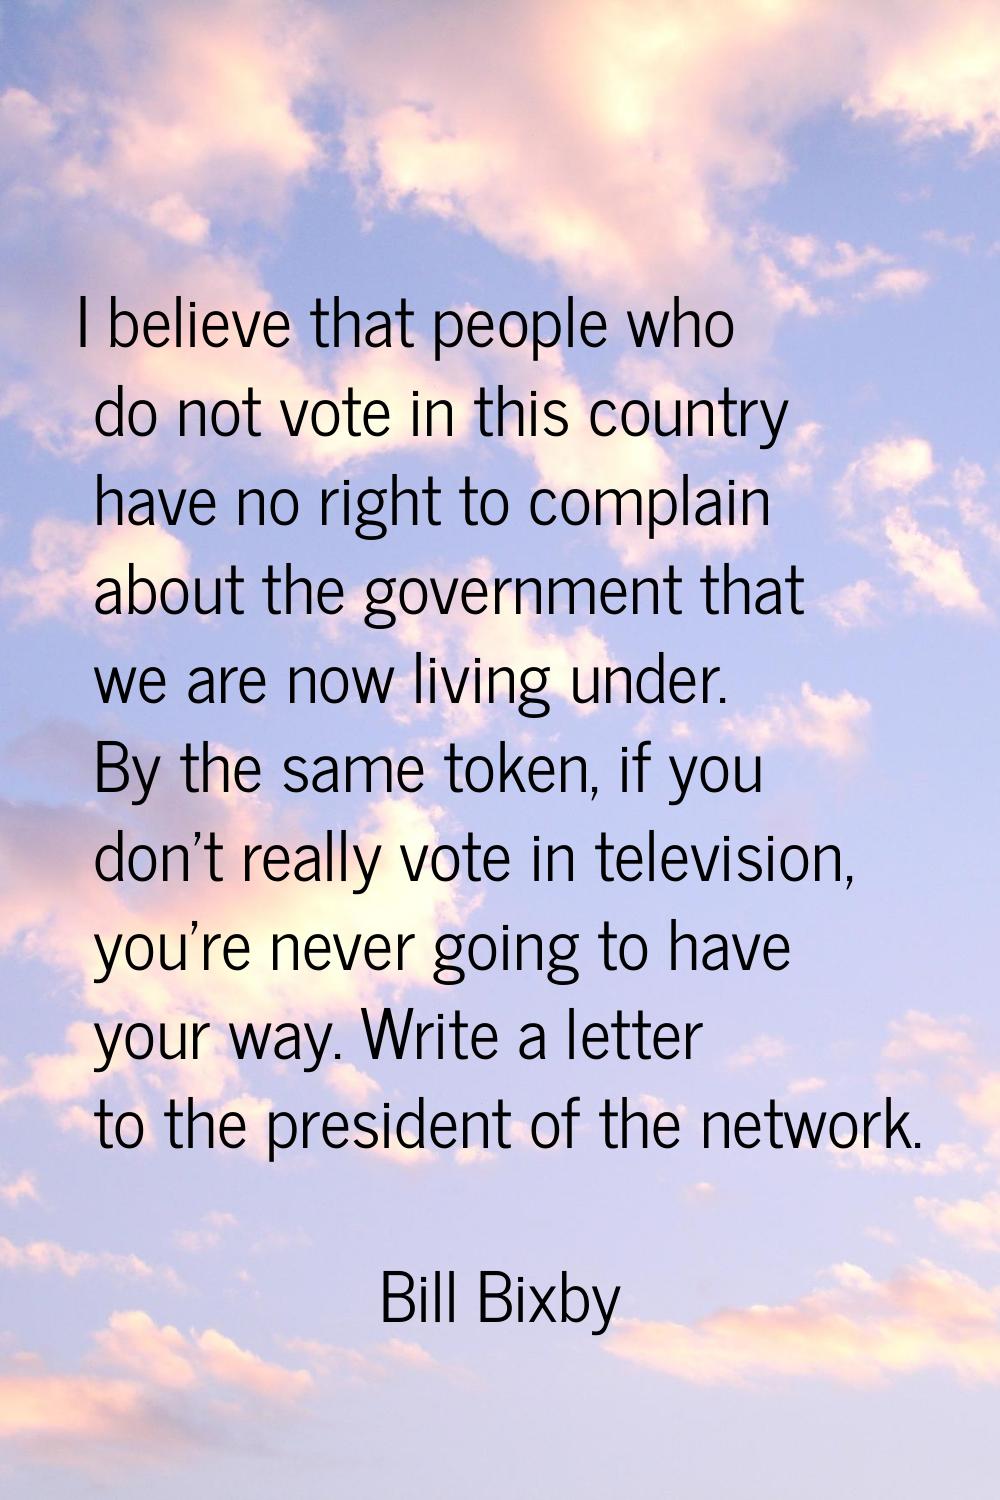 I believe that people who do not vote in this country have no right to complain about the governmen